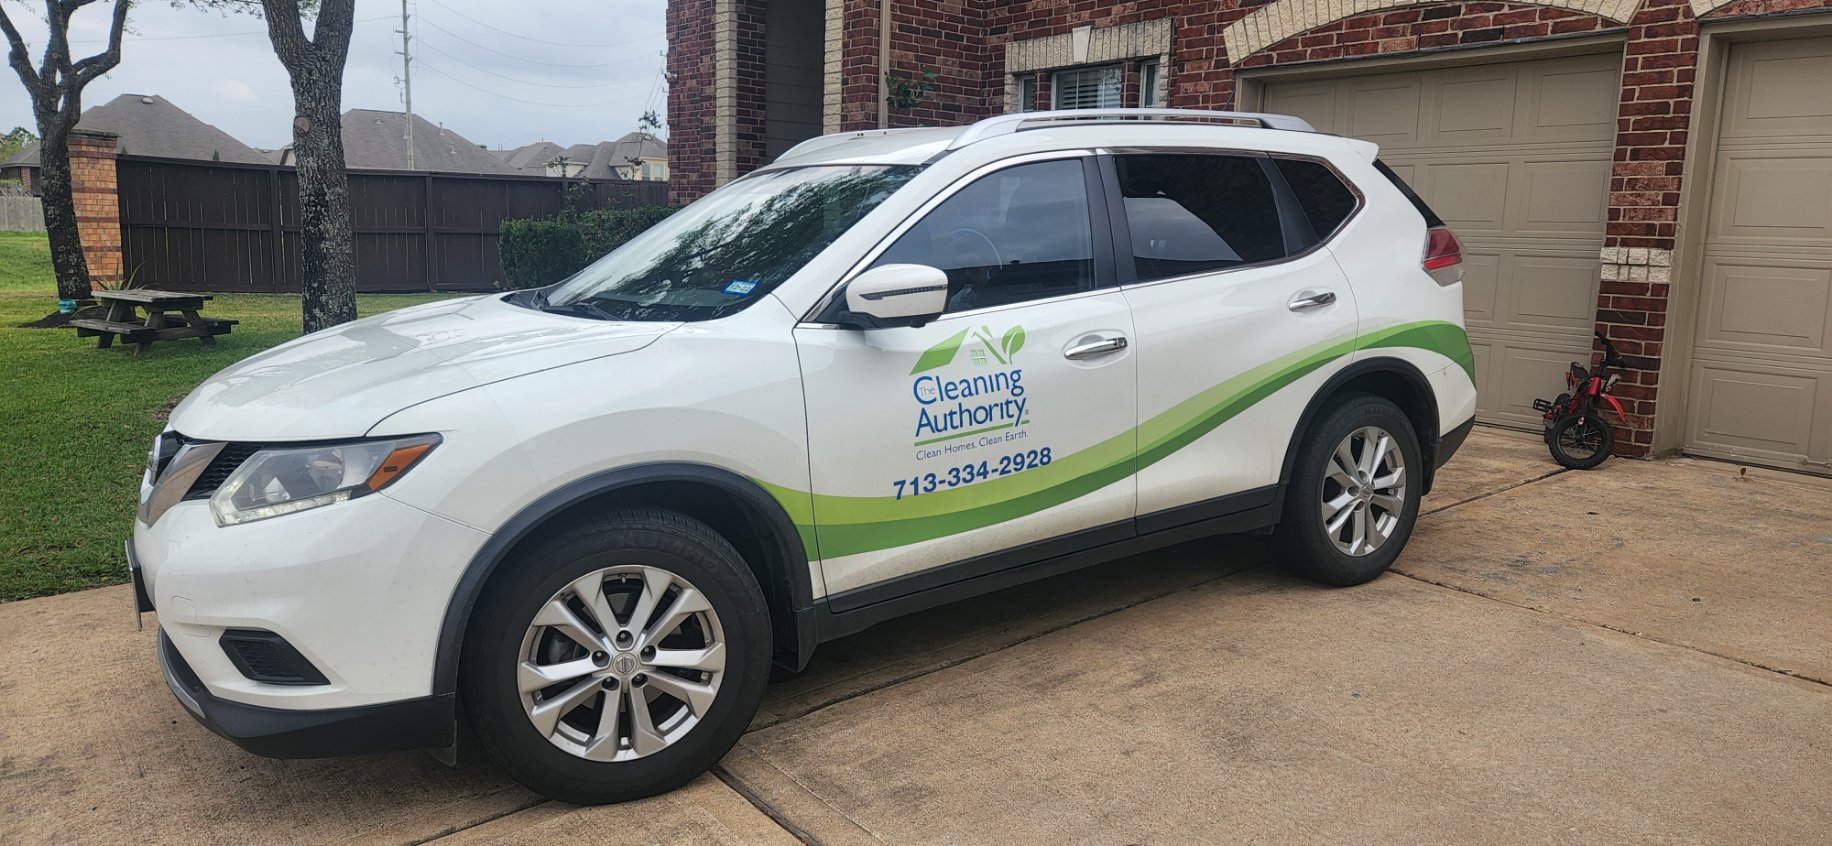 The Cleaning Authority - West Houston